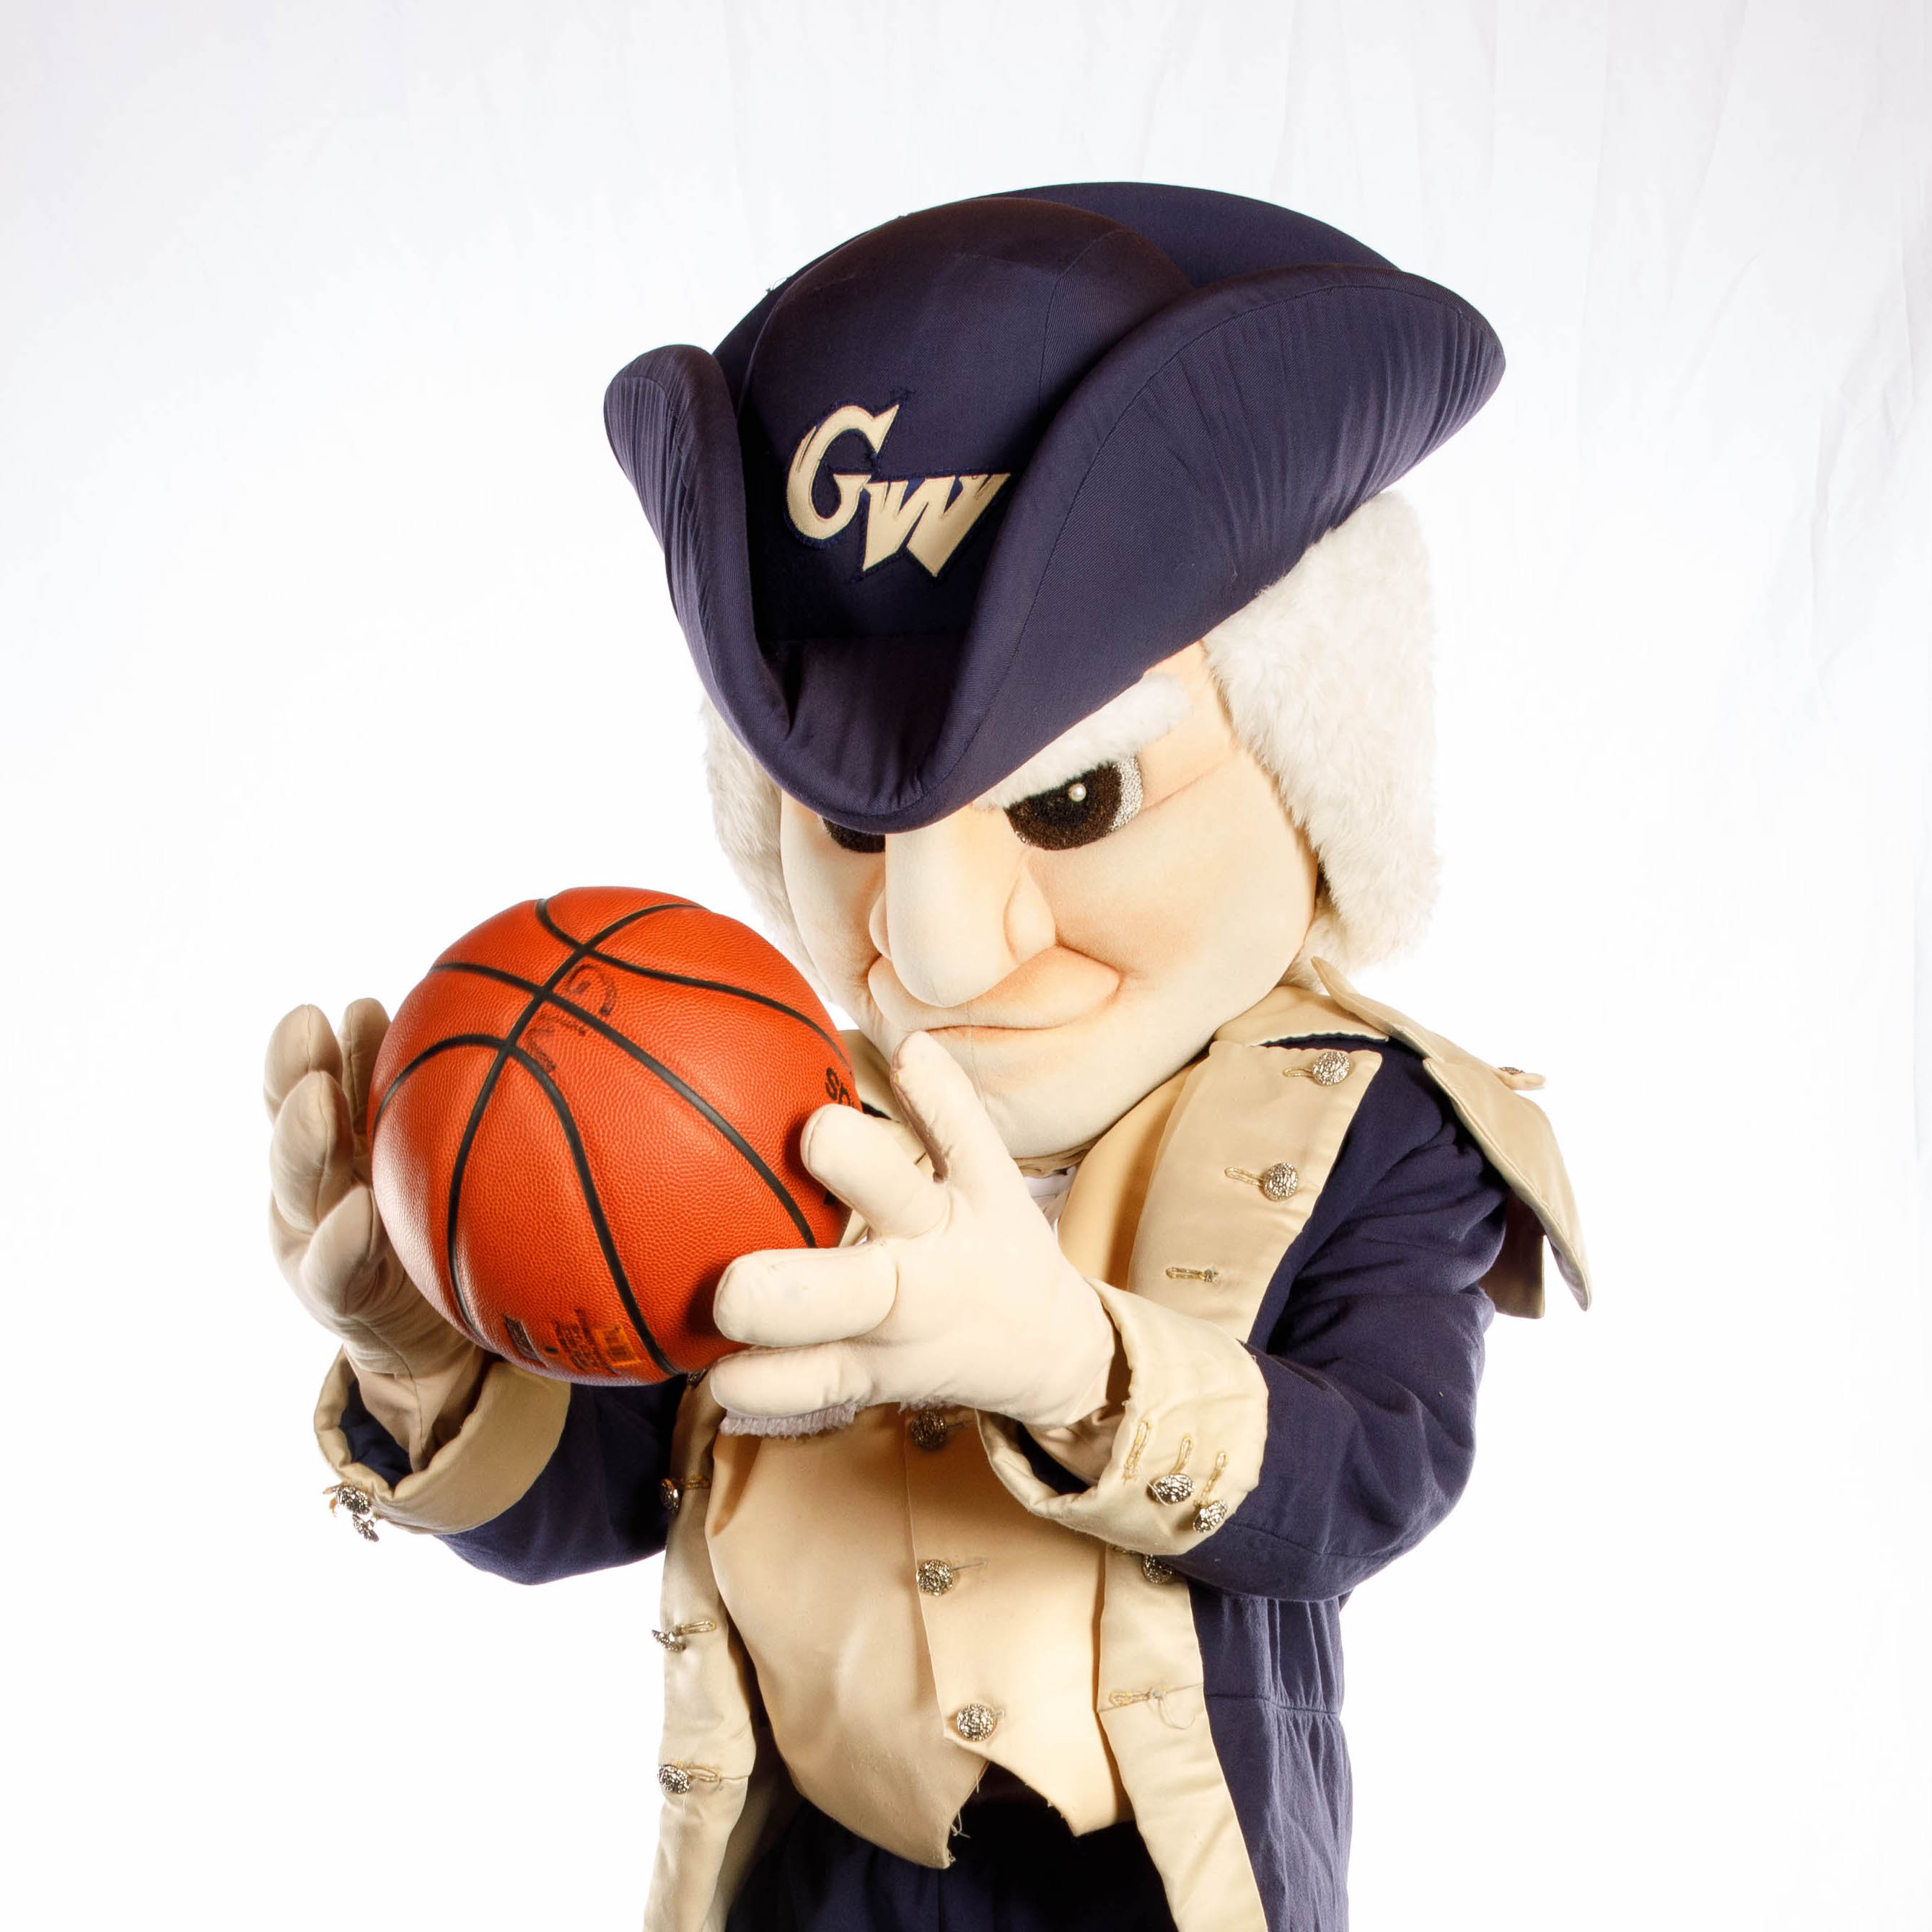 GW's George Mascot holding a basketball